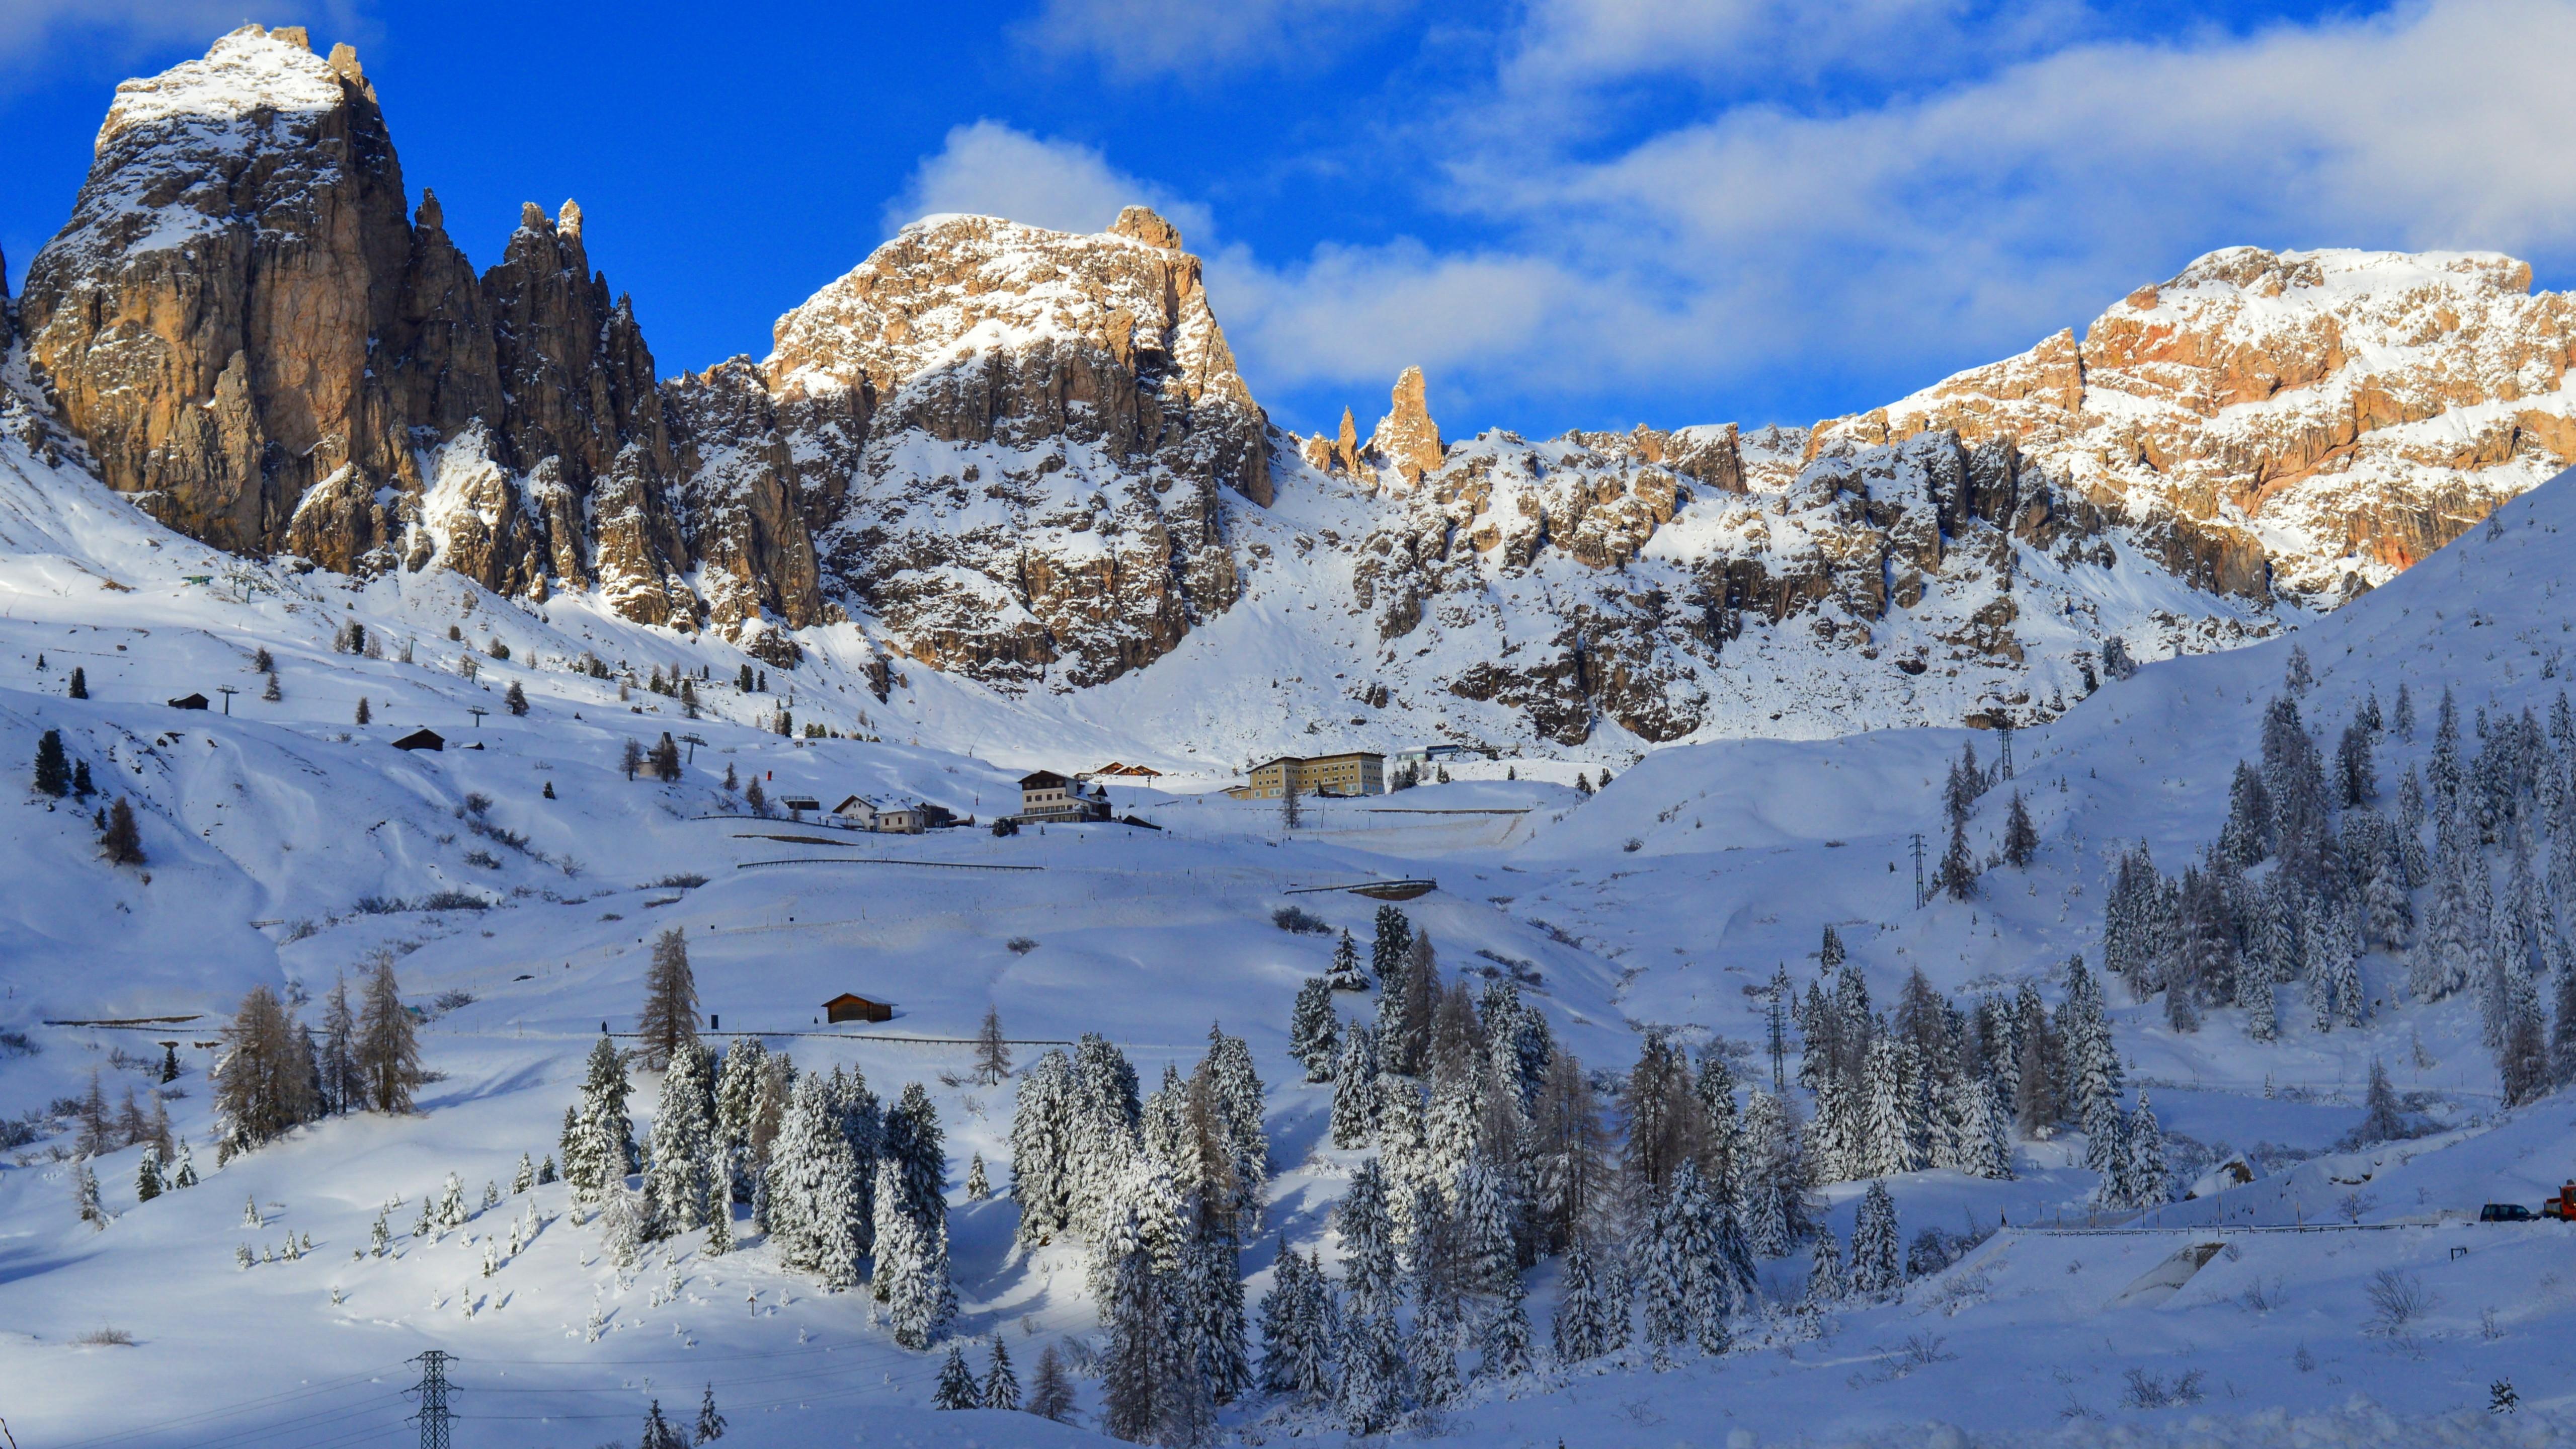 Dolomites Mountains Hd Nature 4k Wallpapers Images Ba